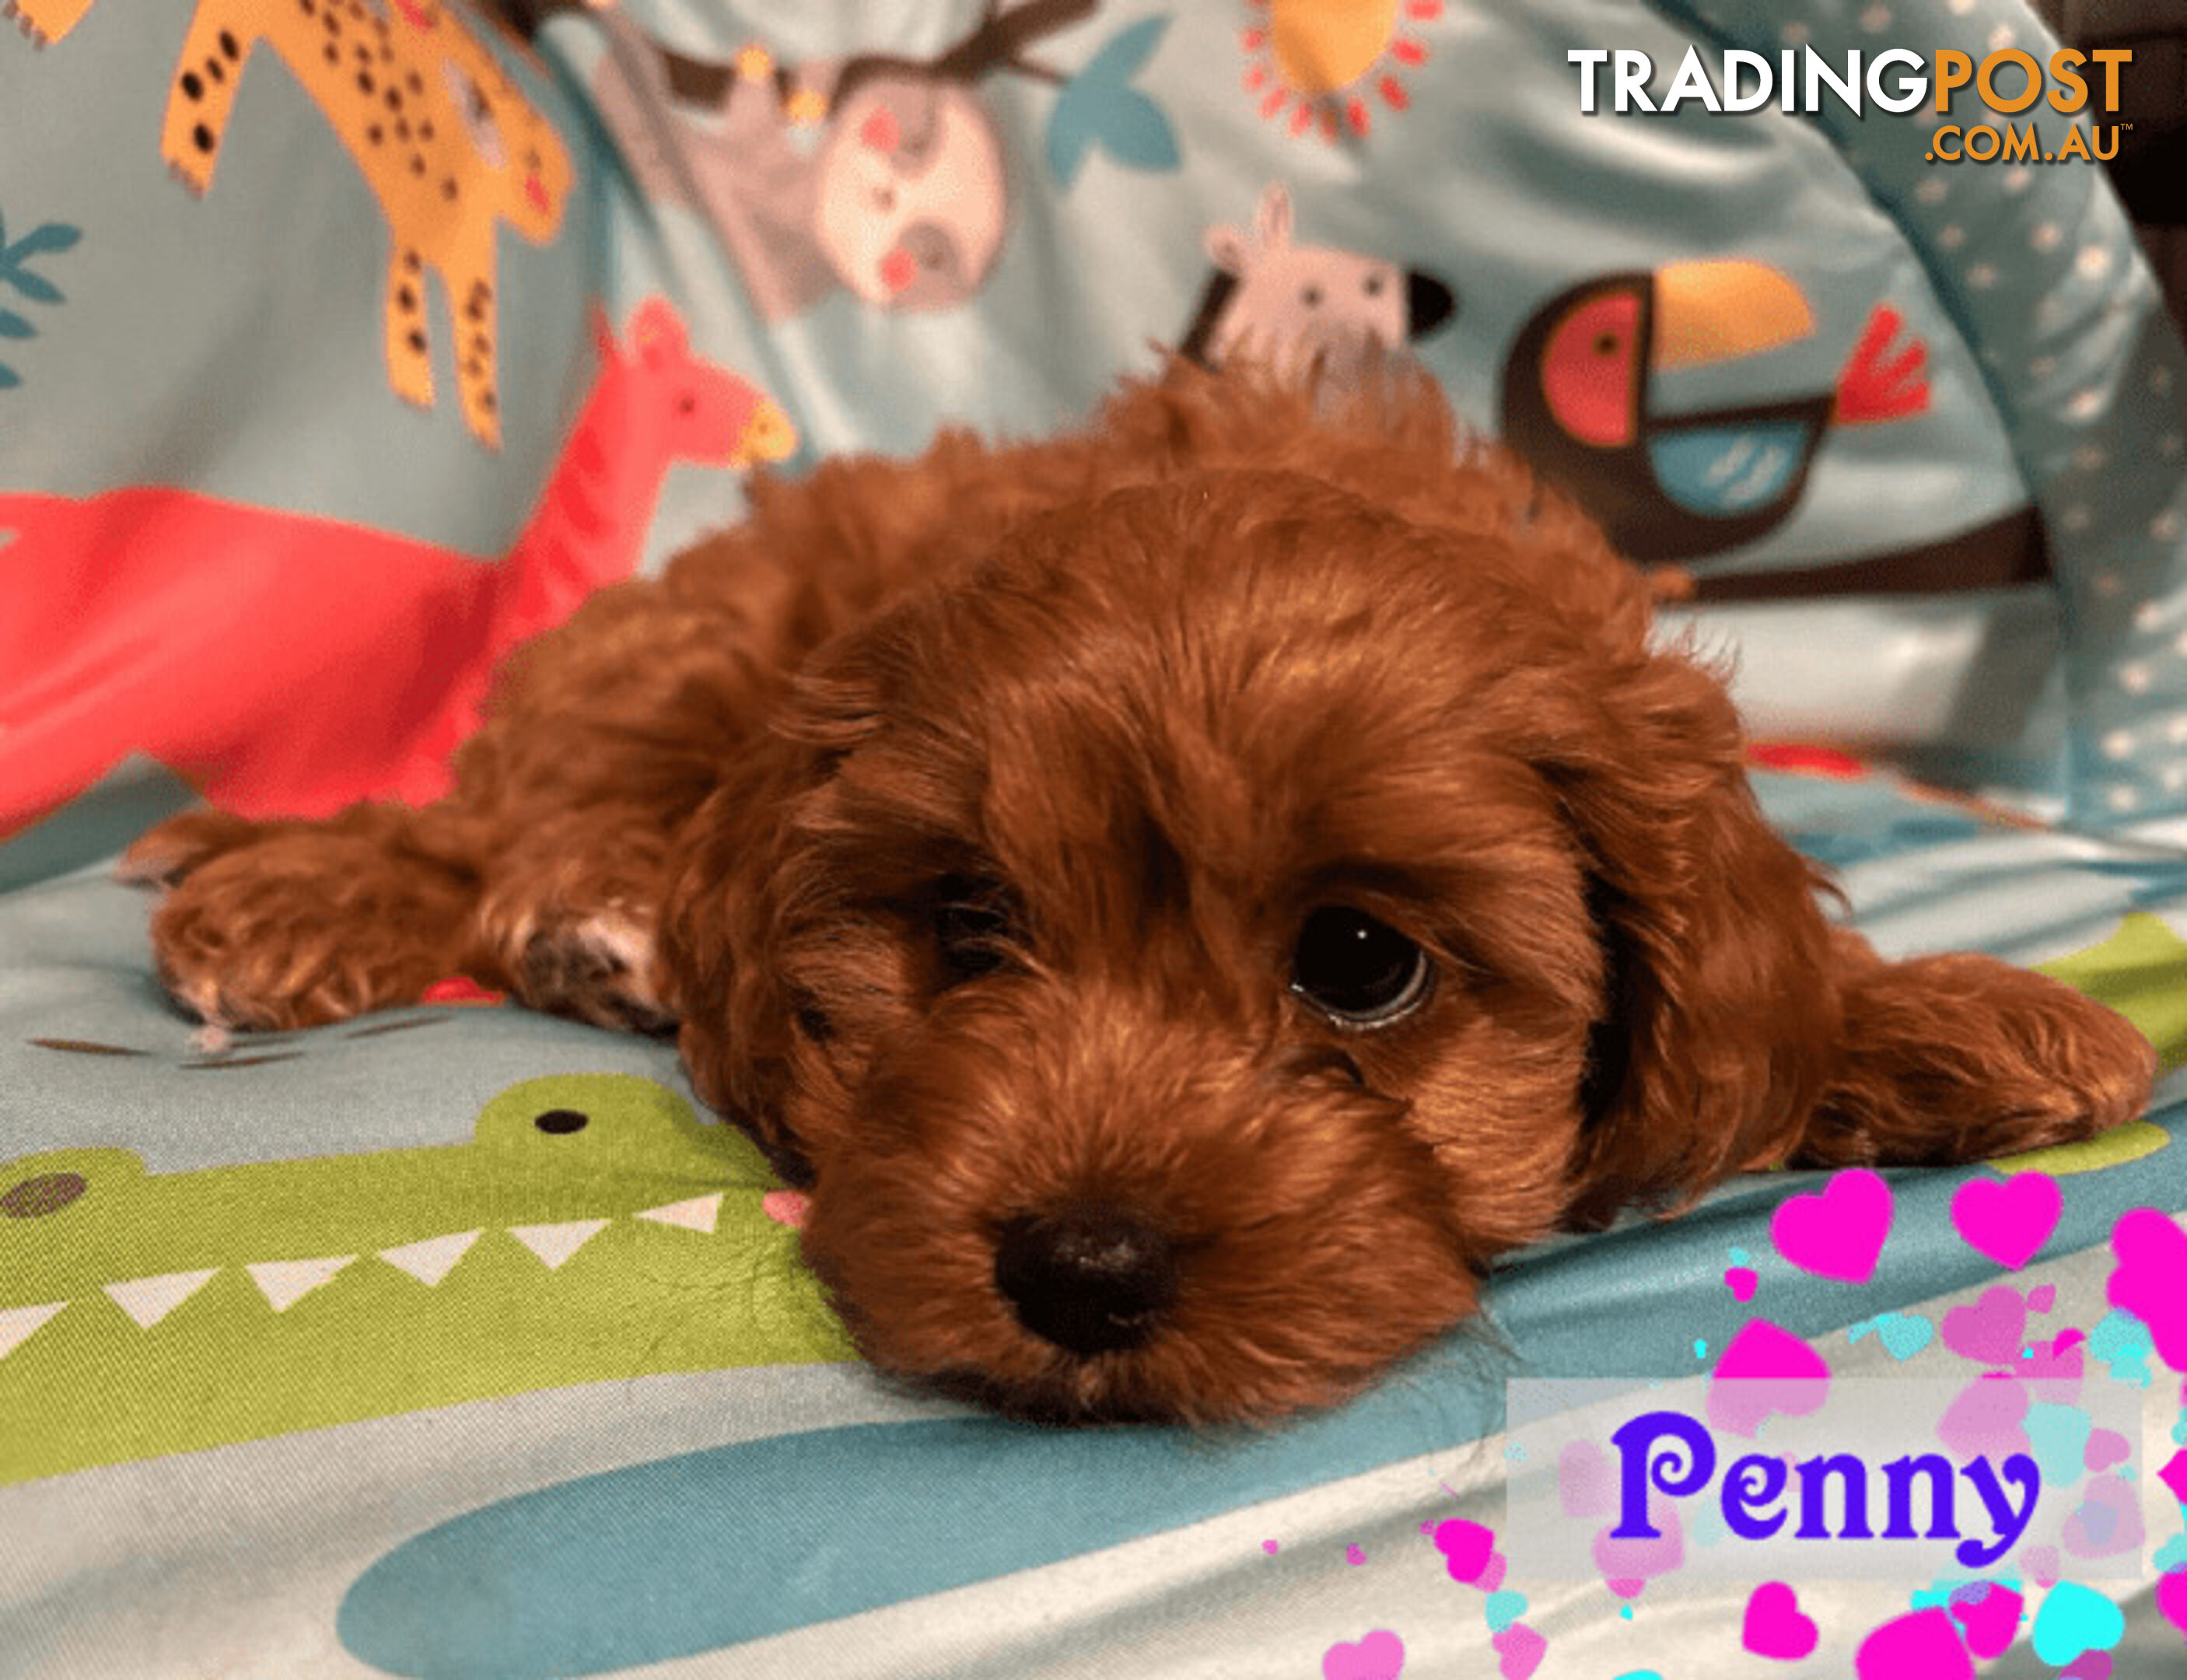 1st Gen Toy Cavoodle Pups DNA Clear, Toilet Trained, Health Guarantee, Available Now. Dandenong Vic